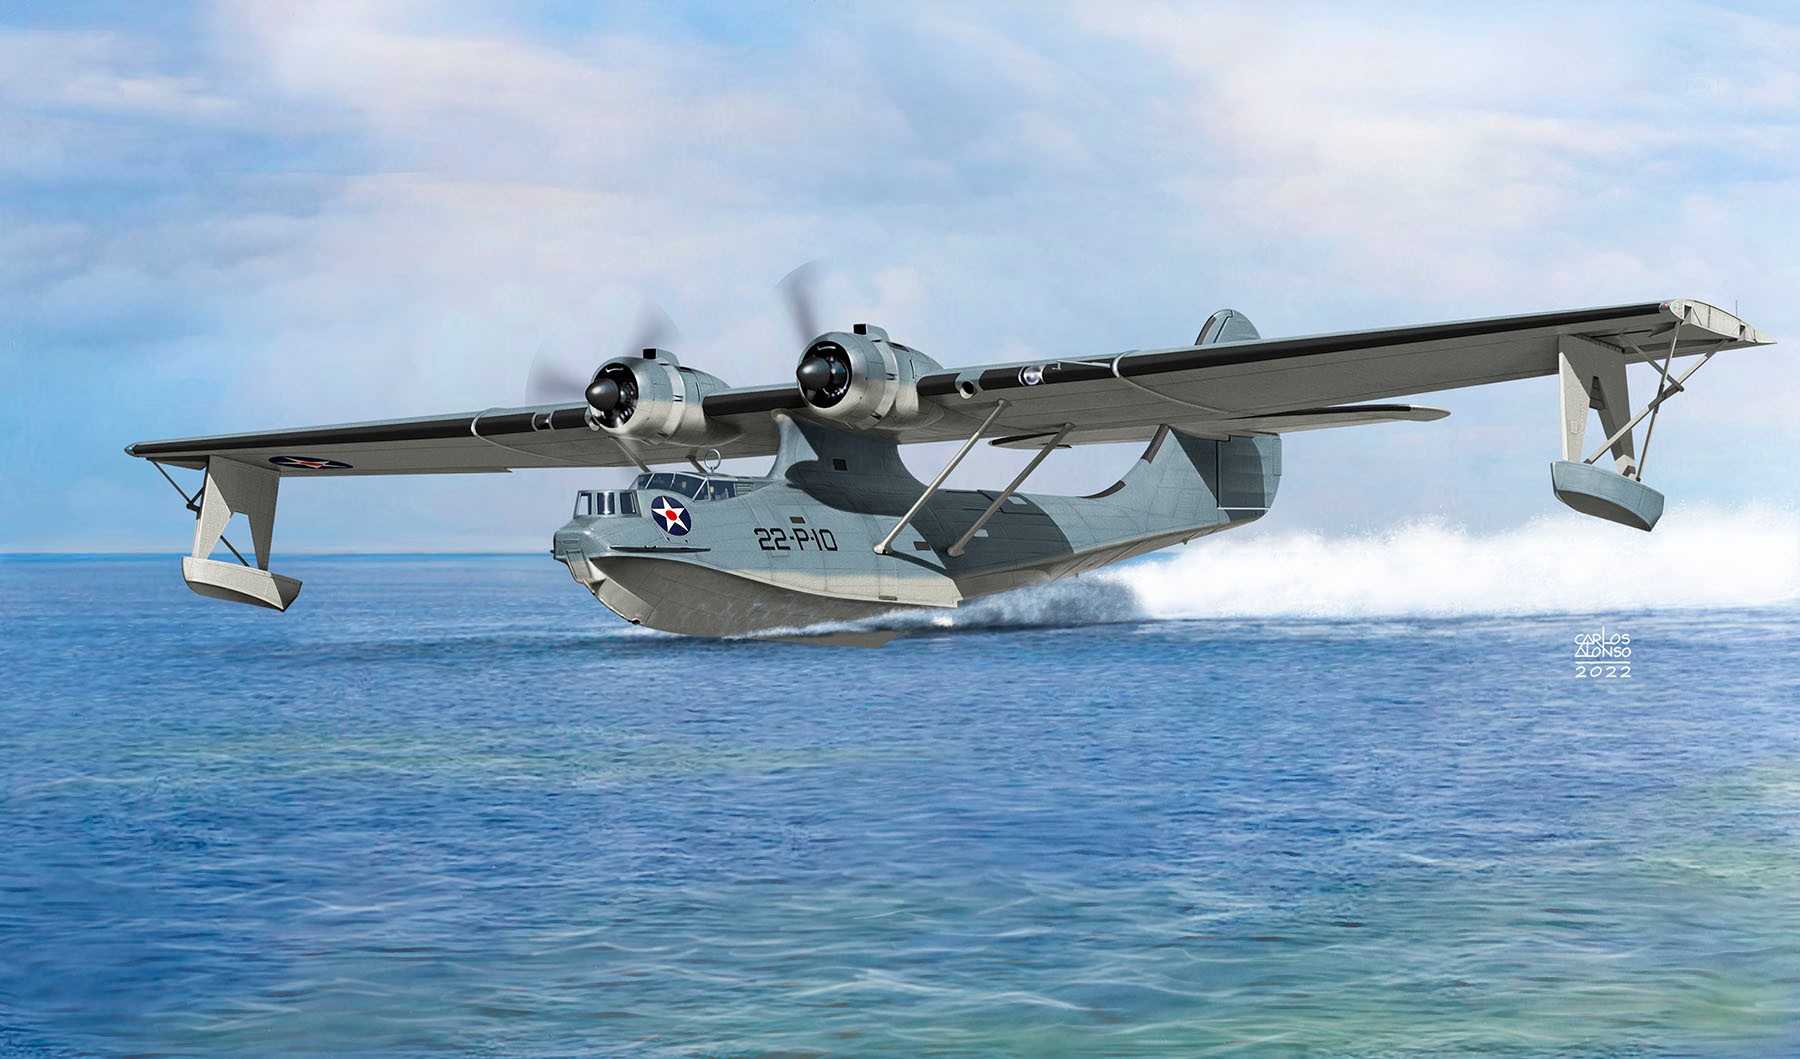 General 1800x1059 sea aircraft military Consolidated PBY Catalina military vehicle clouds military aircraft sky water signature artwork United States Navy Flying boat